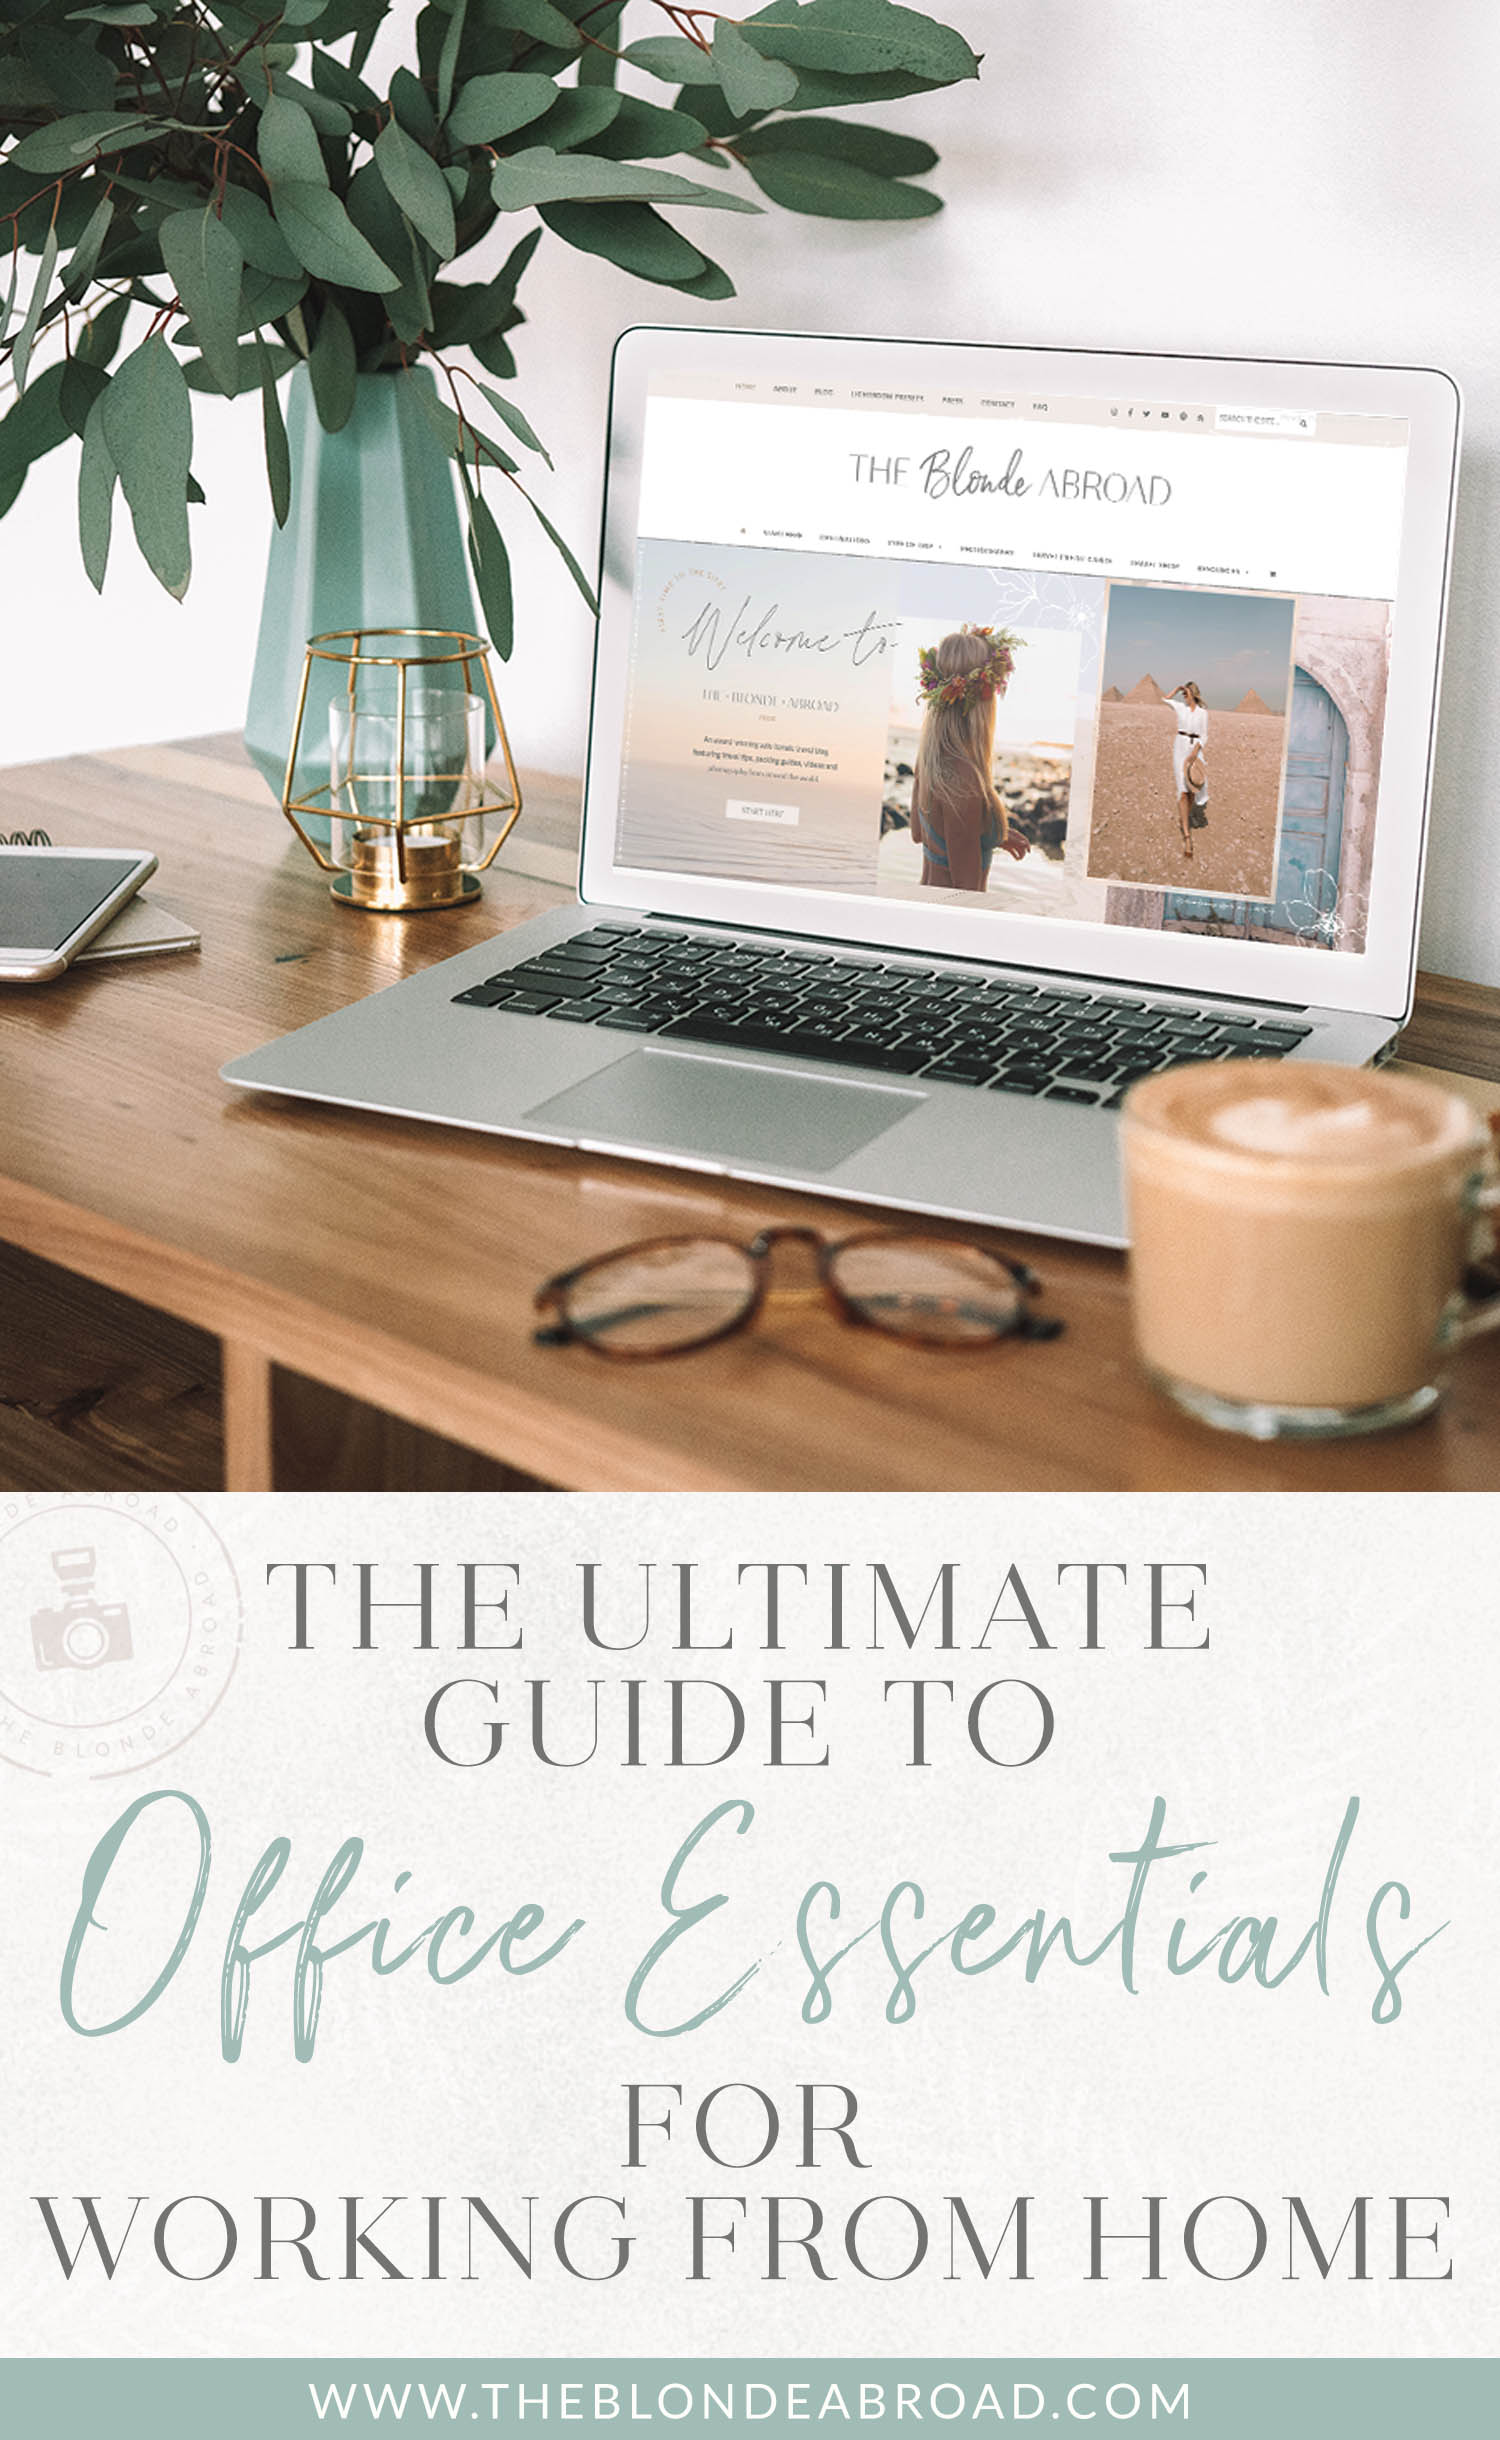 The Ultimate Guide to Office Essentials for Working from Home